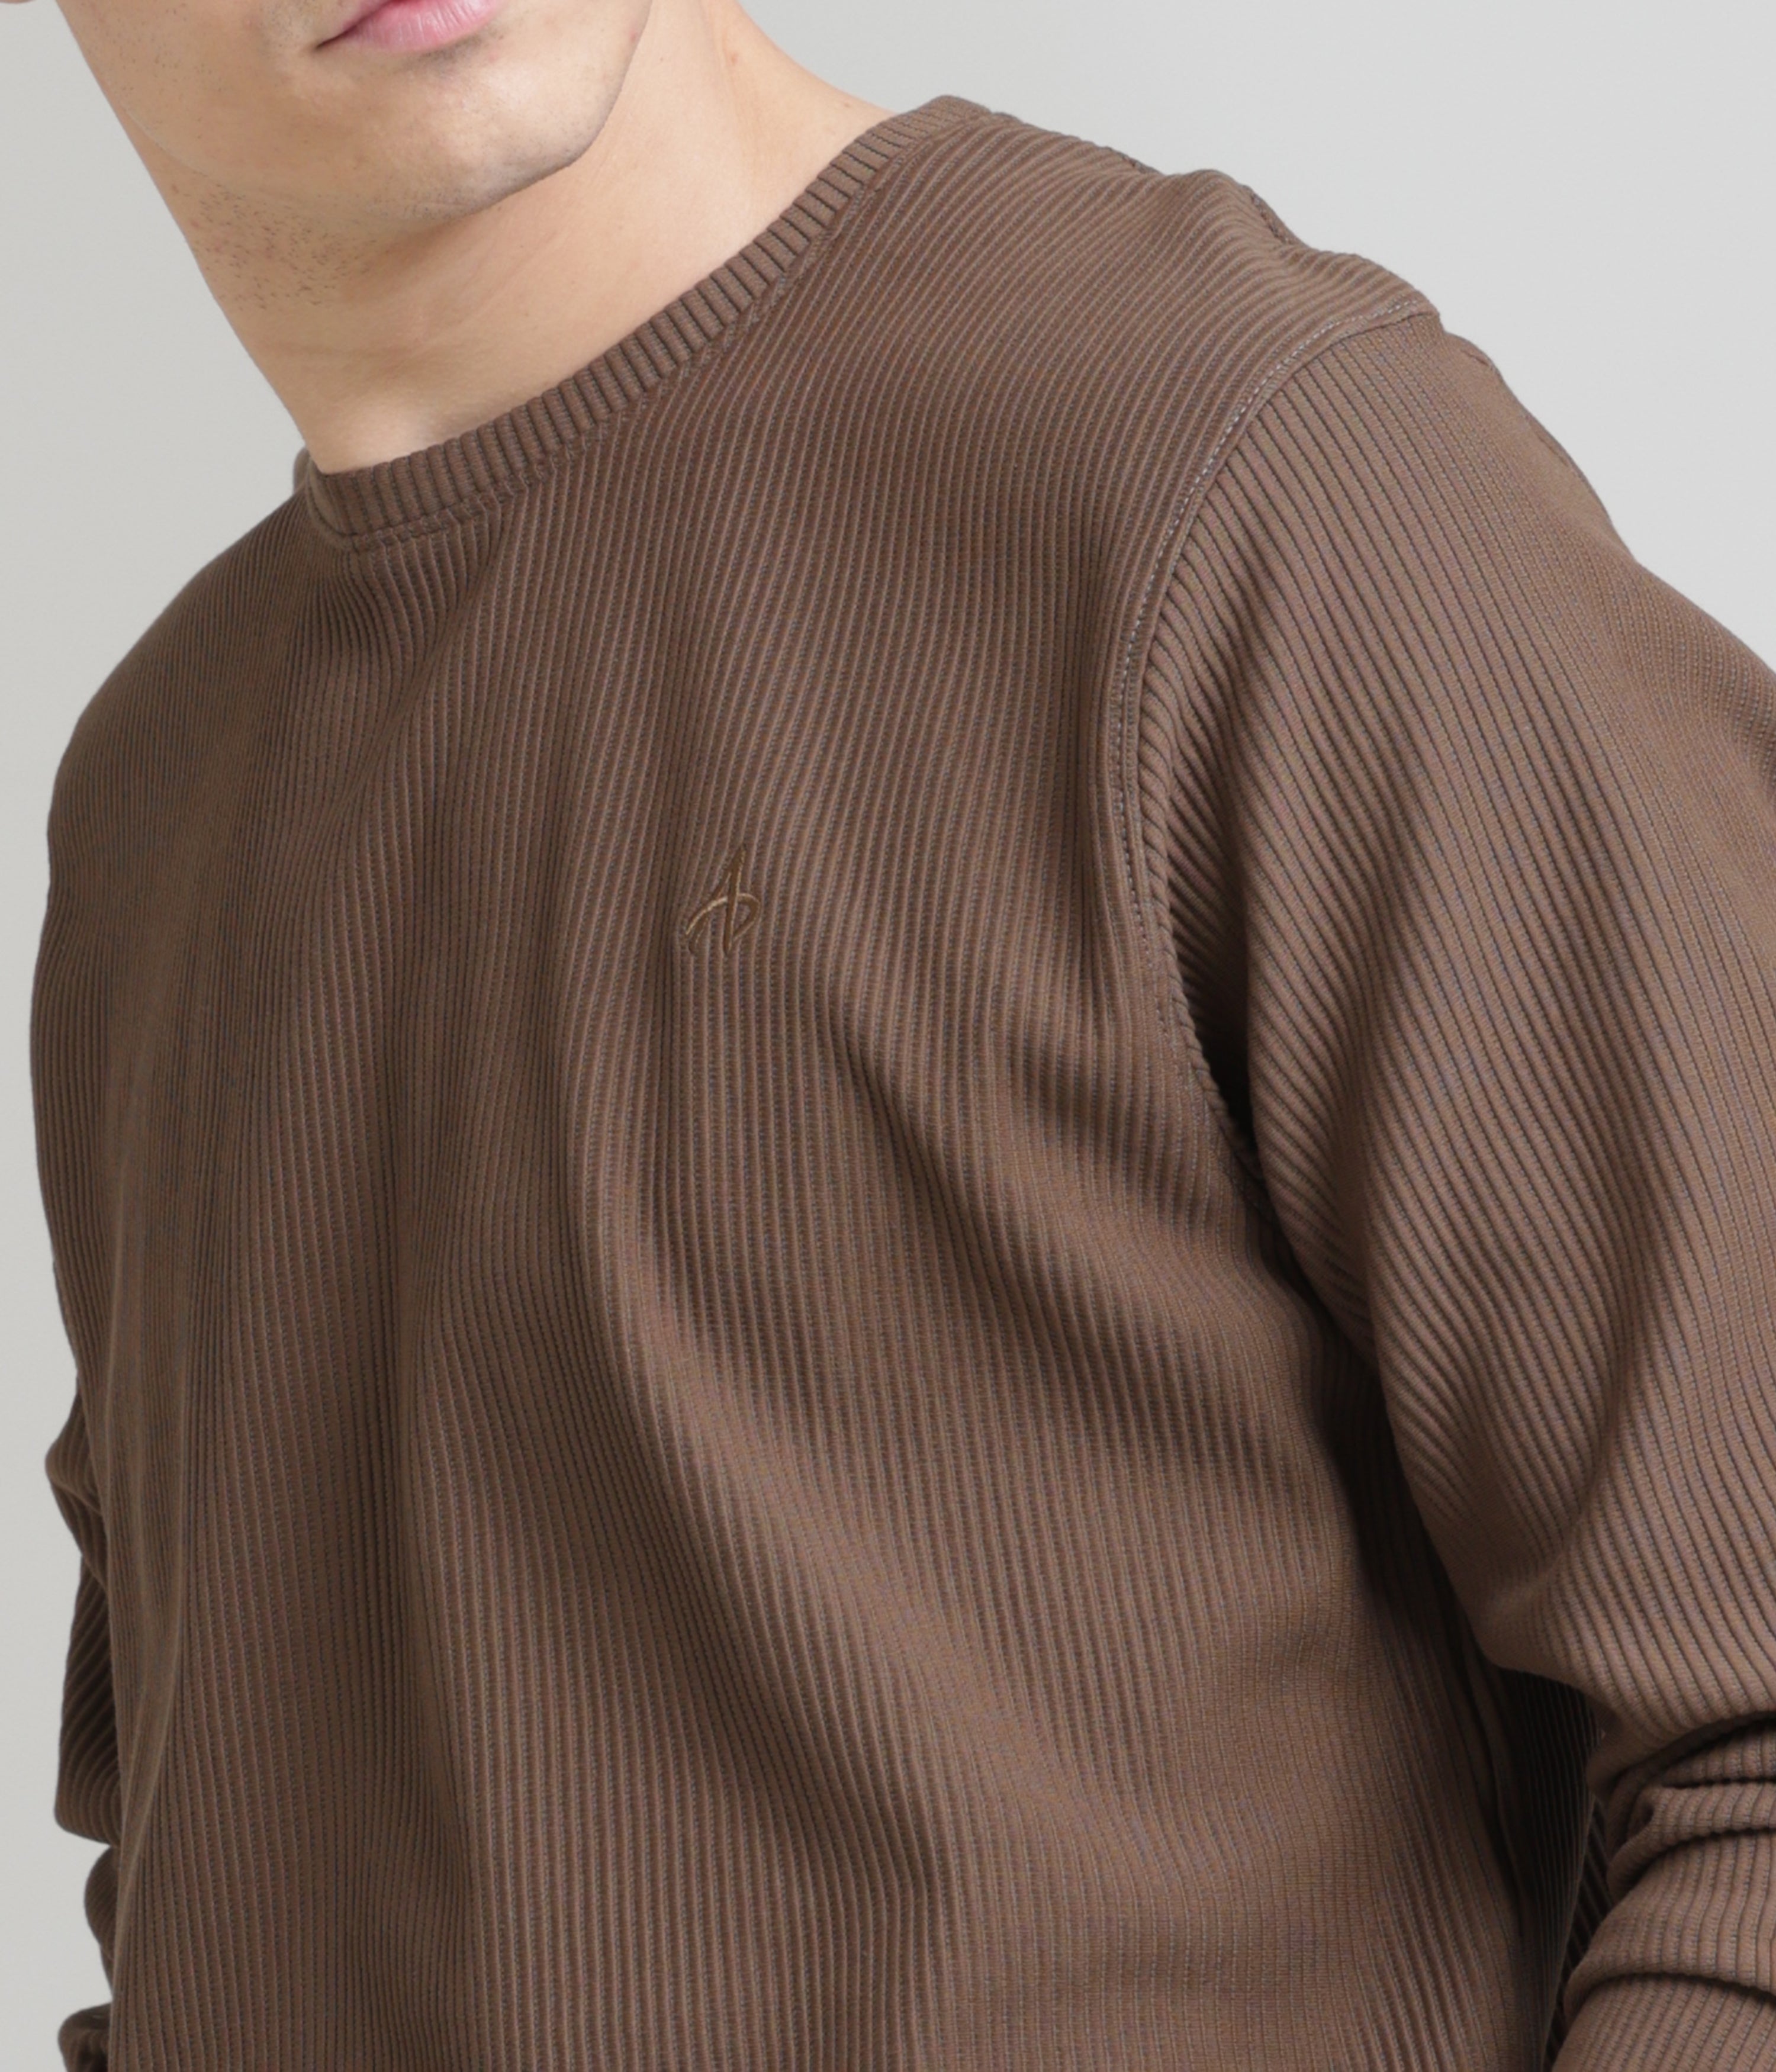 Brown Regular Fit Sweatshirt: Cozy, Casual Comfort for Chilly Days